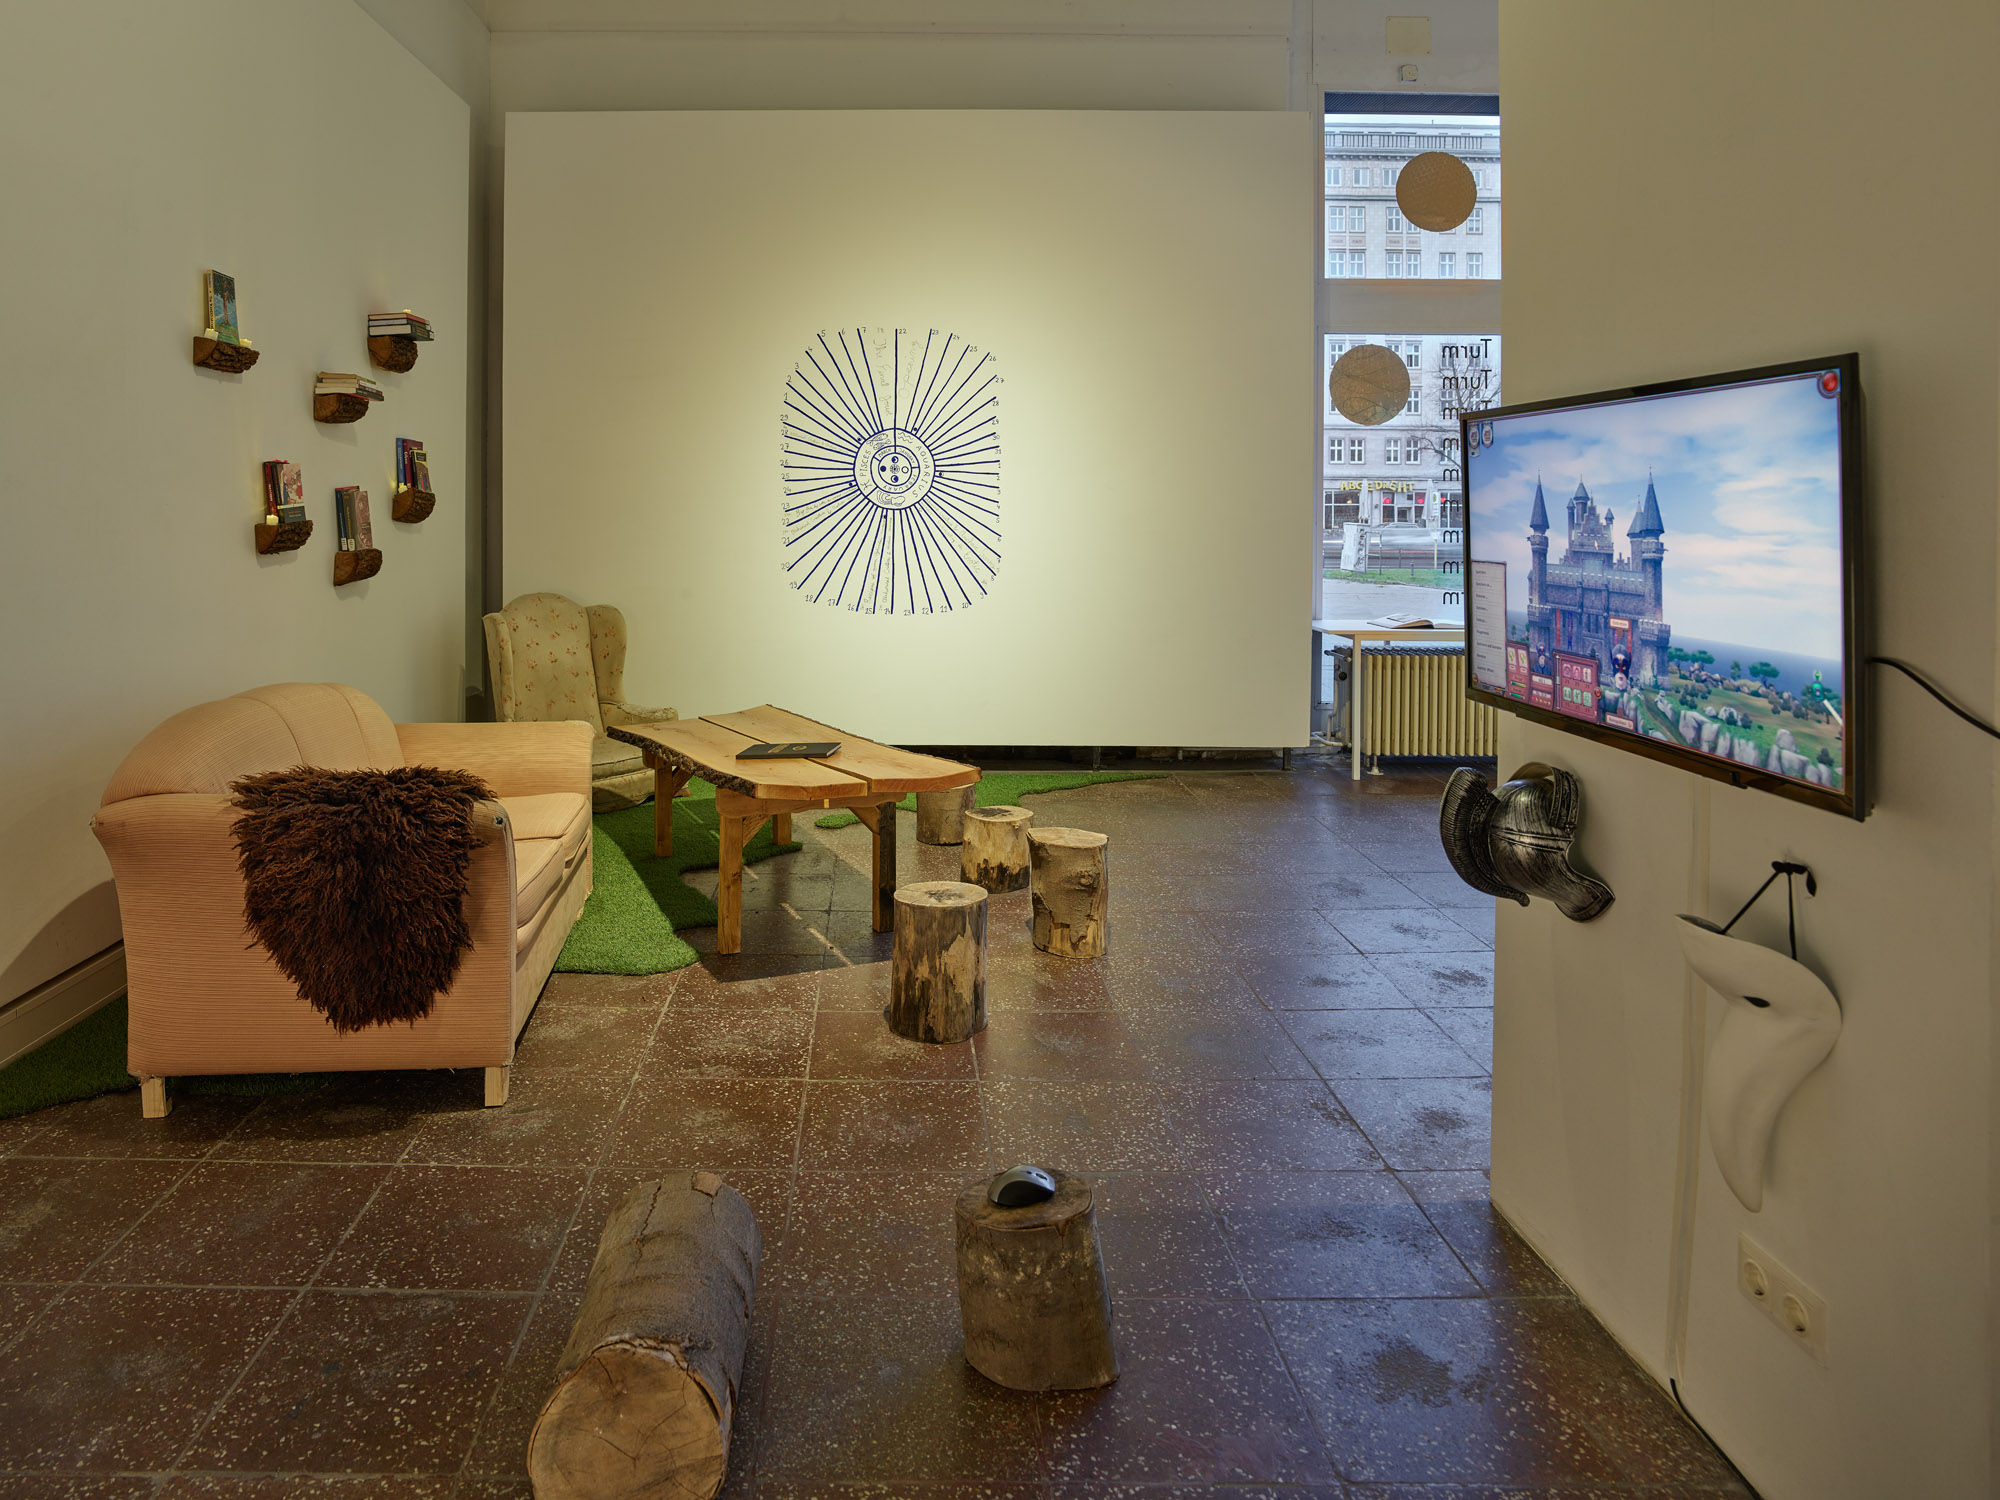 The photo is an exhibition view of the show "Burlungis" in Galerie im Turm in Berlin. On the left side of the space next to the wall there is an old pink couch, behind it in the corner a beige armchair, next to the couch a table whose table top was made from a tree trunk with bark. The furniture stands on a piece of artificial grass in a curvy shape. The rest of the floor is made of stone-gray tiles. Cut tree trunks are scattered around the table as seating. In the middle on the back wall is painted a blue color and an oval shape a lunar calendar. On the right side of the picture there is a monitor on the wall of a column. A lock can be seen on the monitor in 3D. The image section belongs to a computer game. Two objects decoratively hang under the monitor. The left object is a silver armor made of plastic, the right object is a white plague doctor mask.